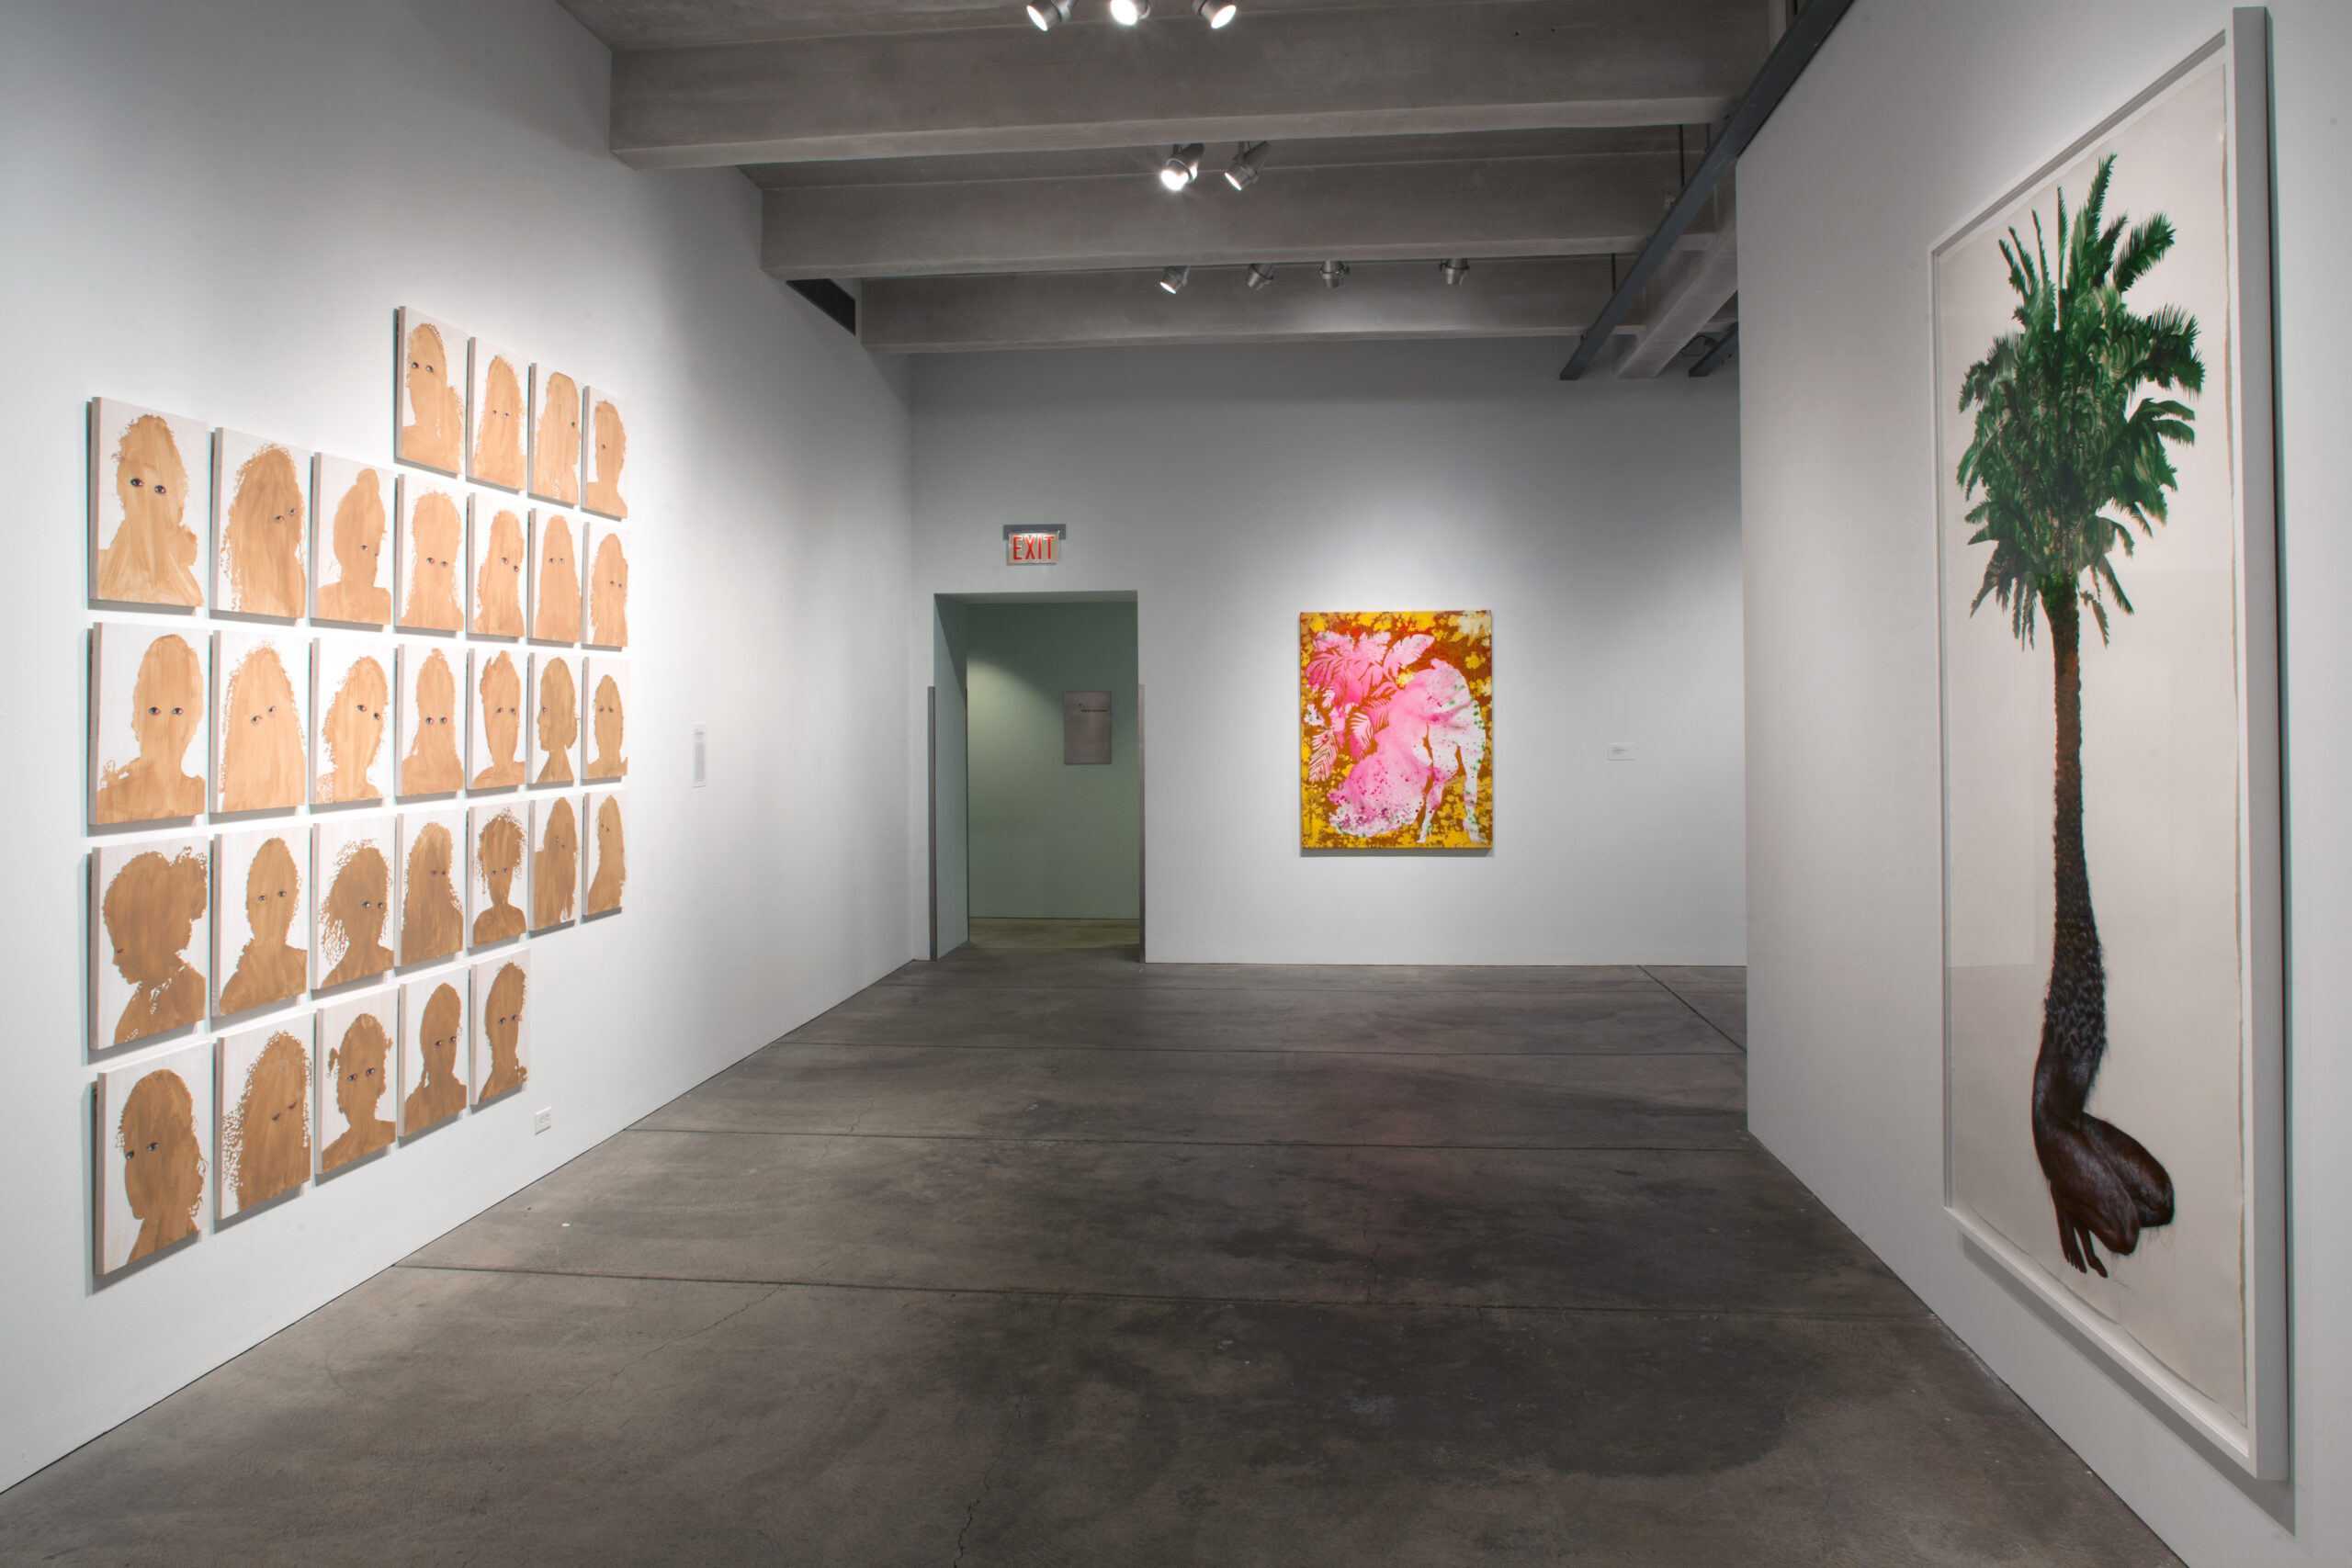 A photograph of Firelei Baez's Bloodlines exhibition. On the left wall is a series of sillhoutte portraits with eyes. On the right is a painting of a palm tree whose trunk ends in a pair of hairy legs. On the far wall is an abrastract painting in gold, pink, iand red.